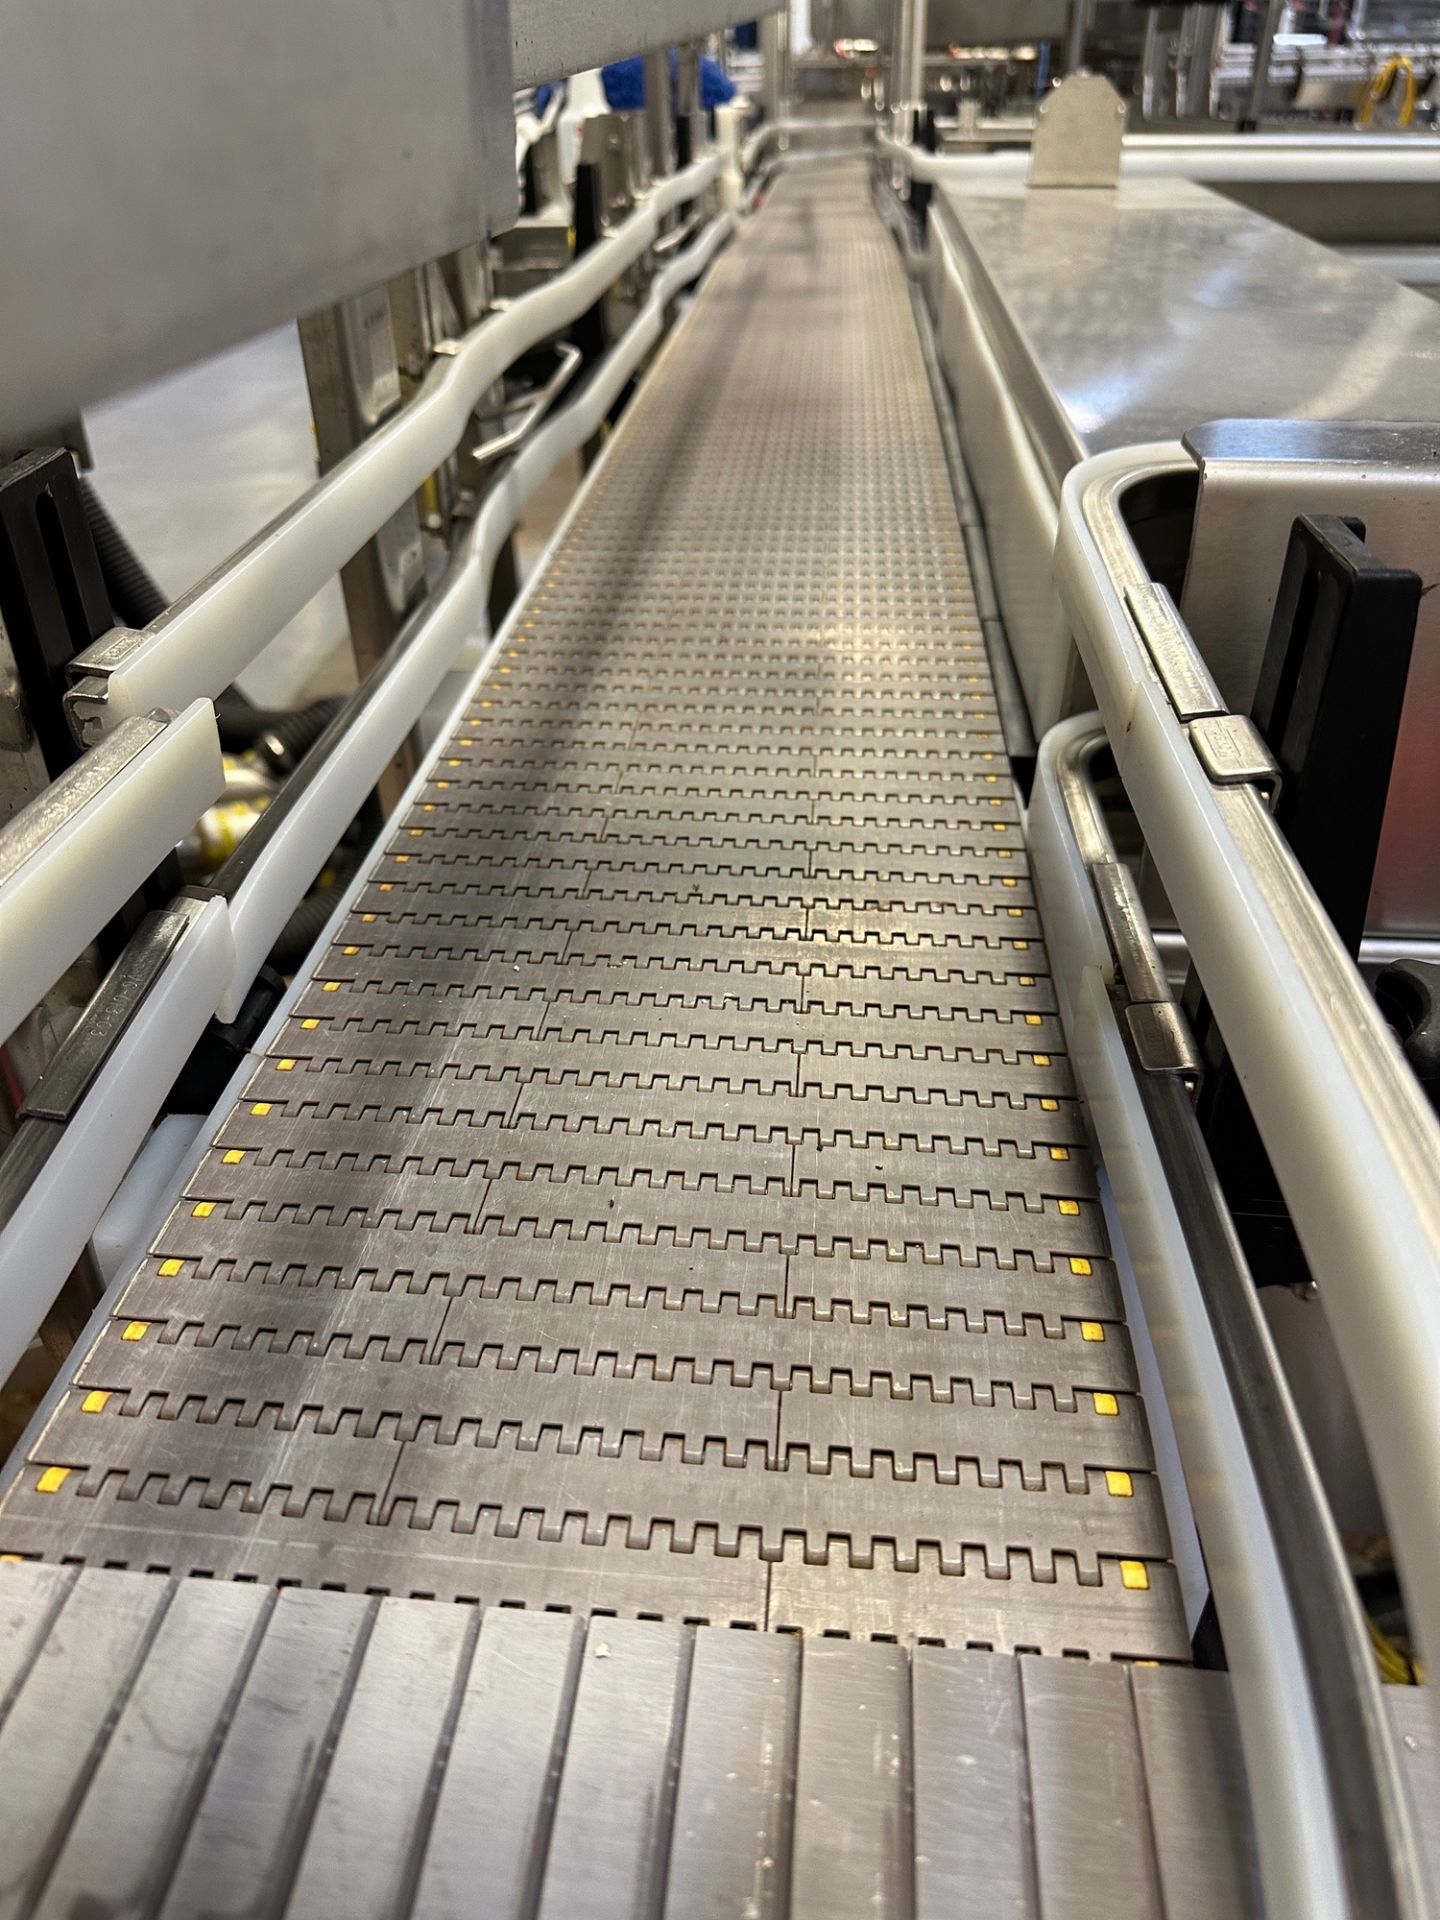 Bevco Conveyor over Stainless Steel Frame (Approx. 9" x 16') | Rig Fee $750